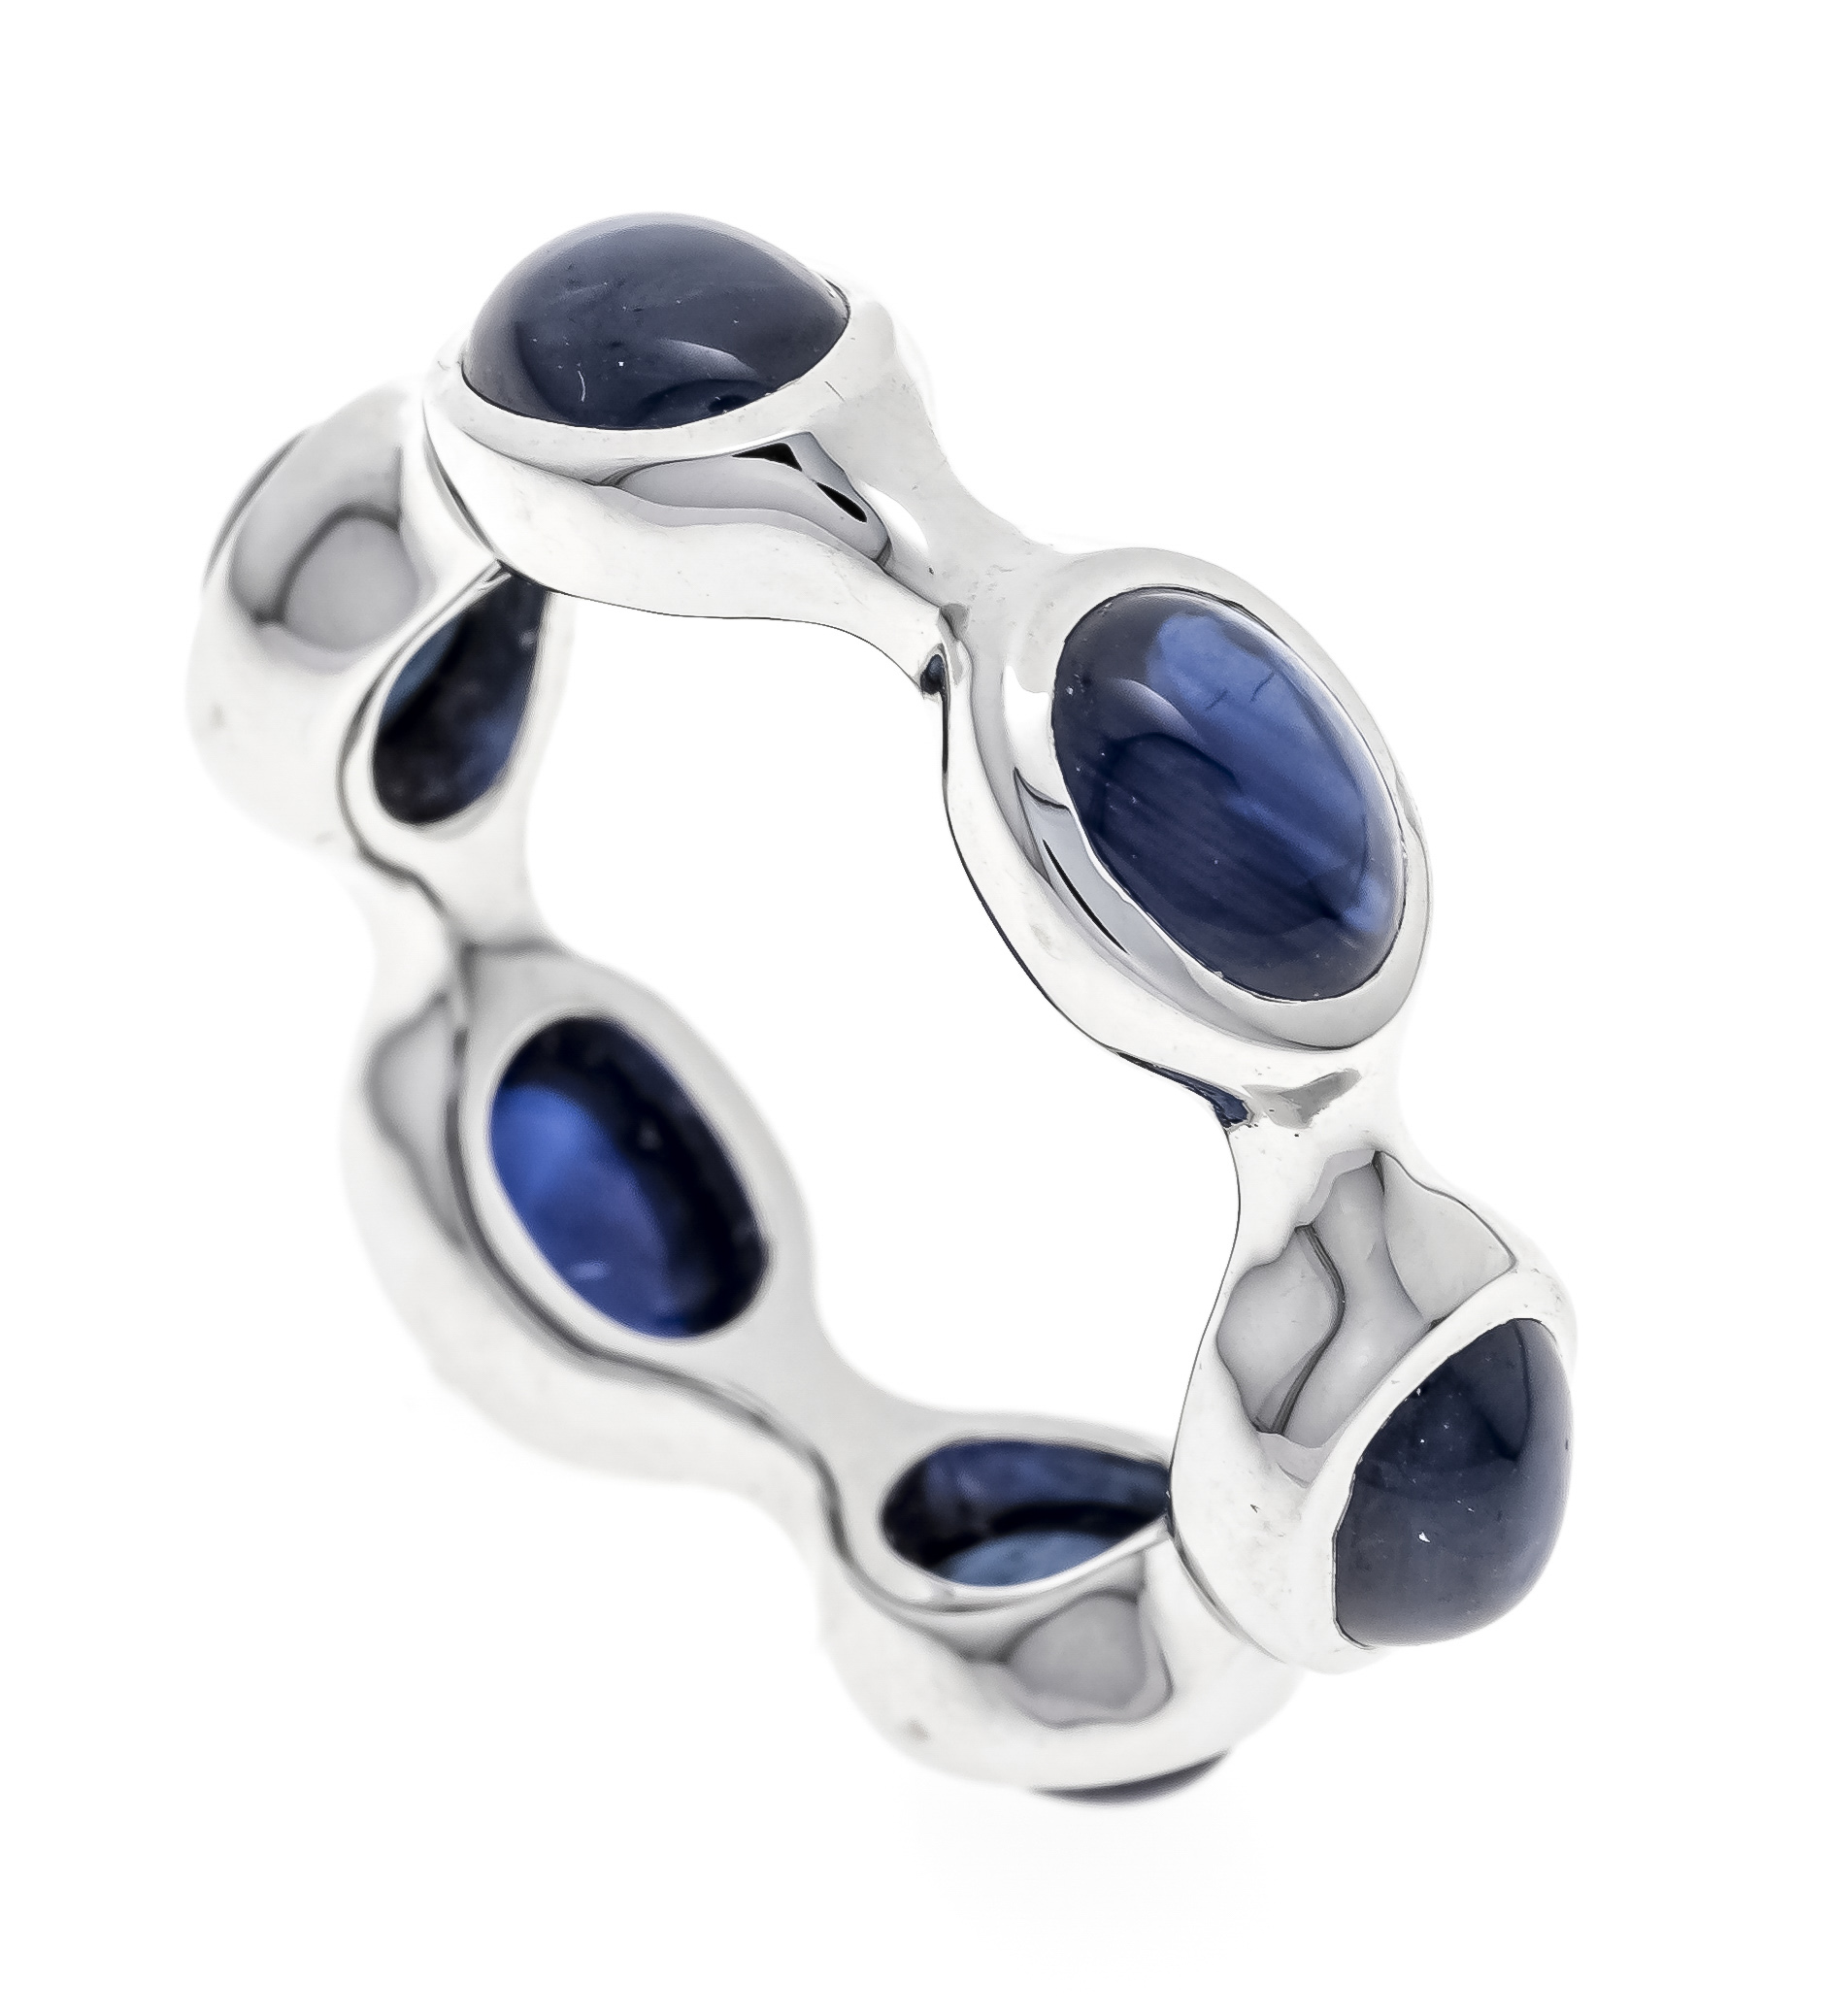 Design sapphire ring WG 750/000 with 6 fine, unheated oval sapphire cabochons, totaling 8.45 ct in